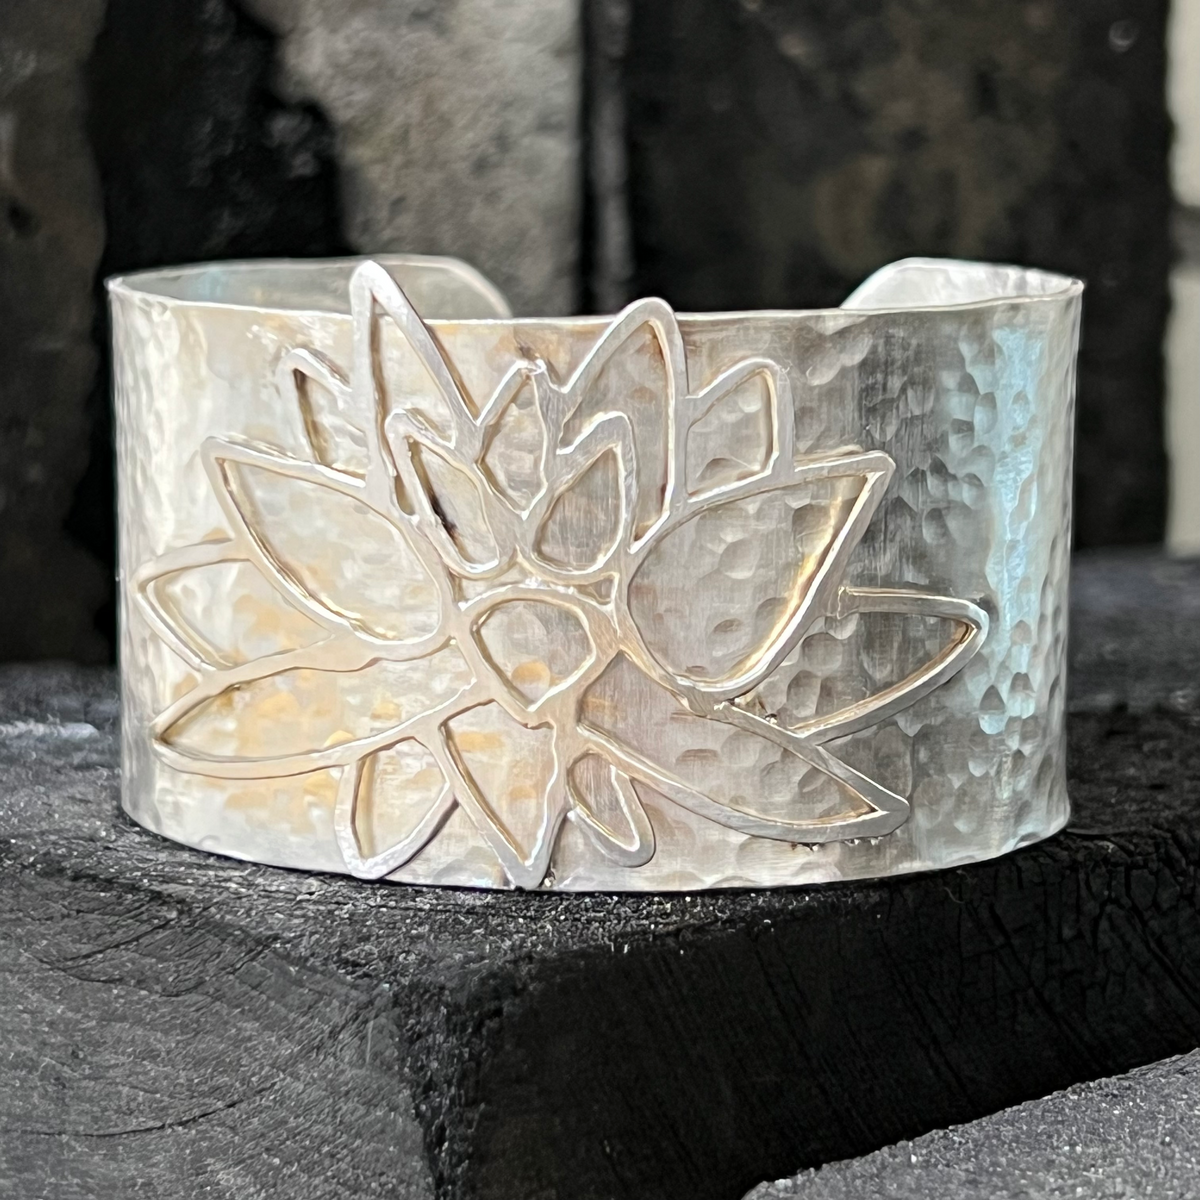 Handmade one of a kind sterling silver lotus cuff bracelet by Garden of Silver.